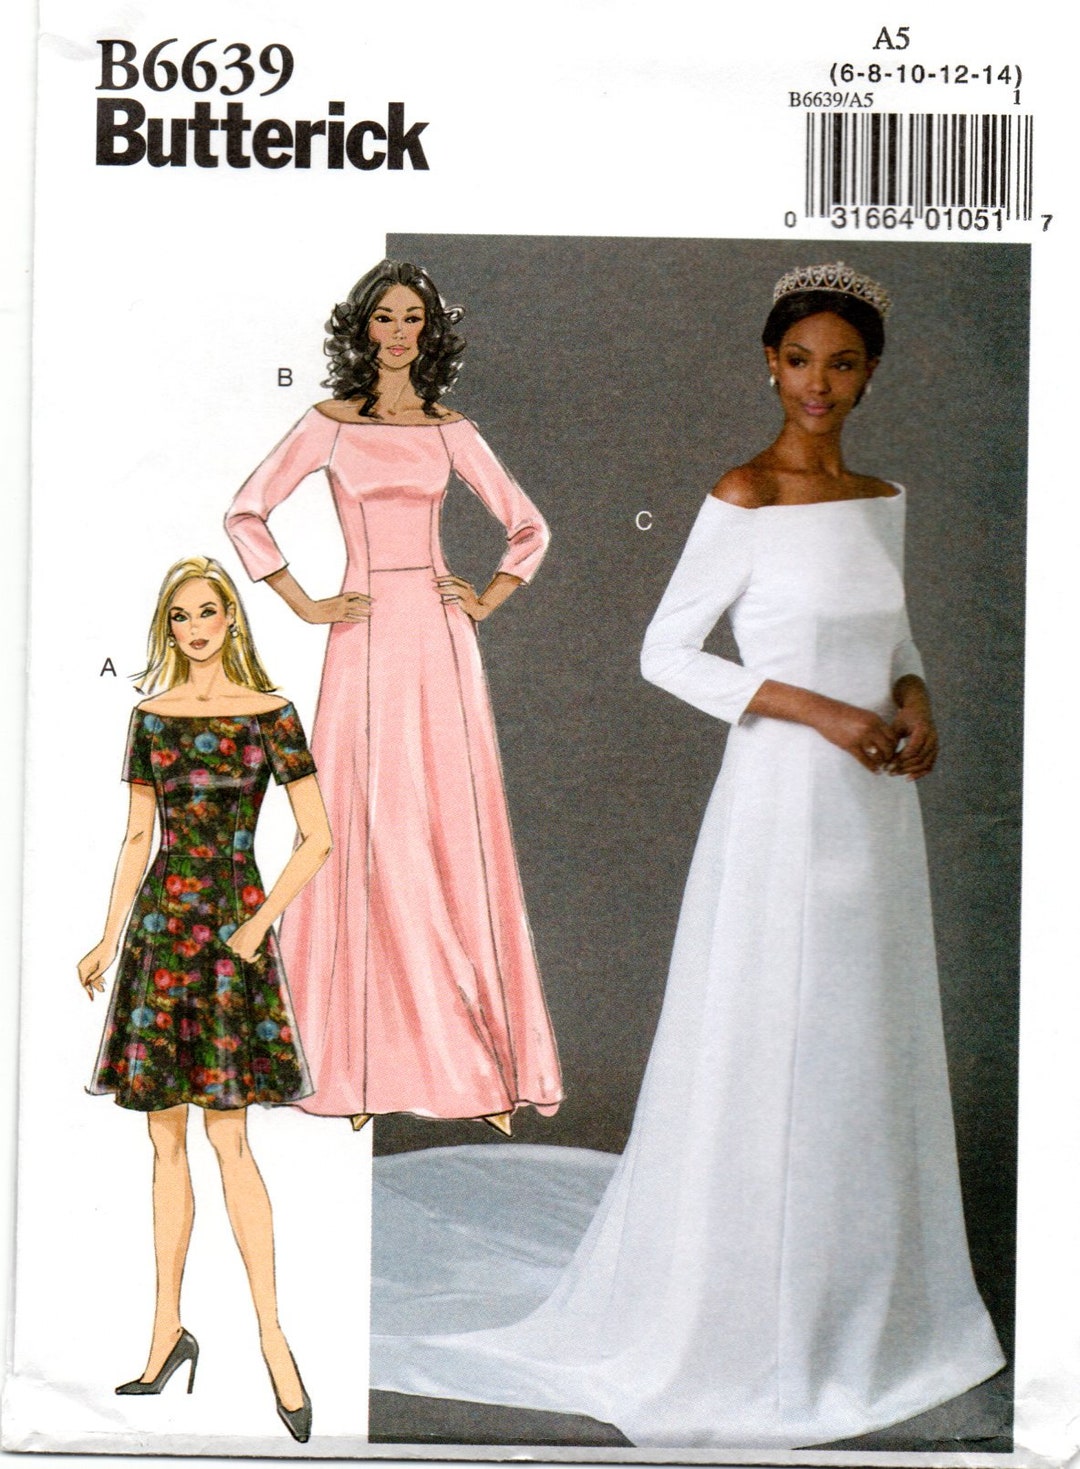 Bridal Gown With Train, Boned Bodice and Dress Butterick 6639 Pattern ...